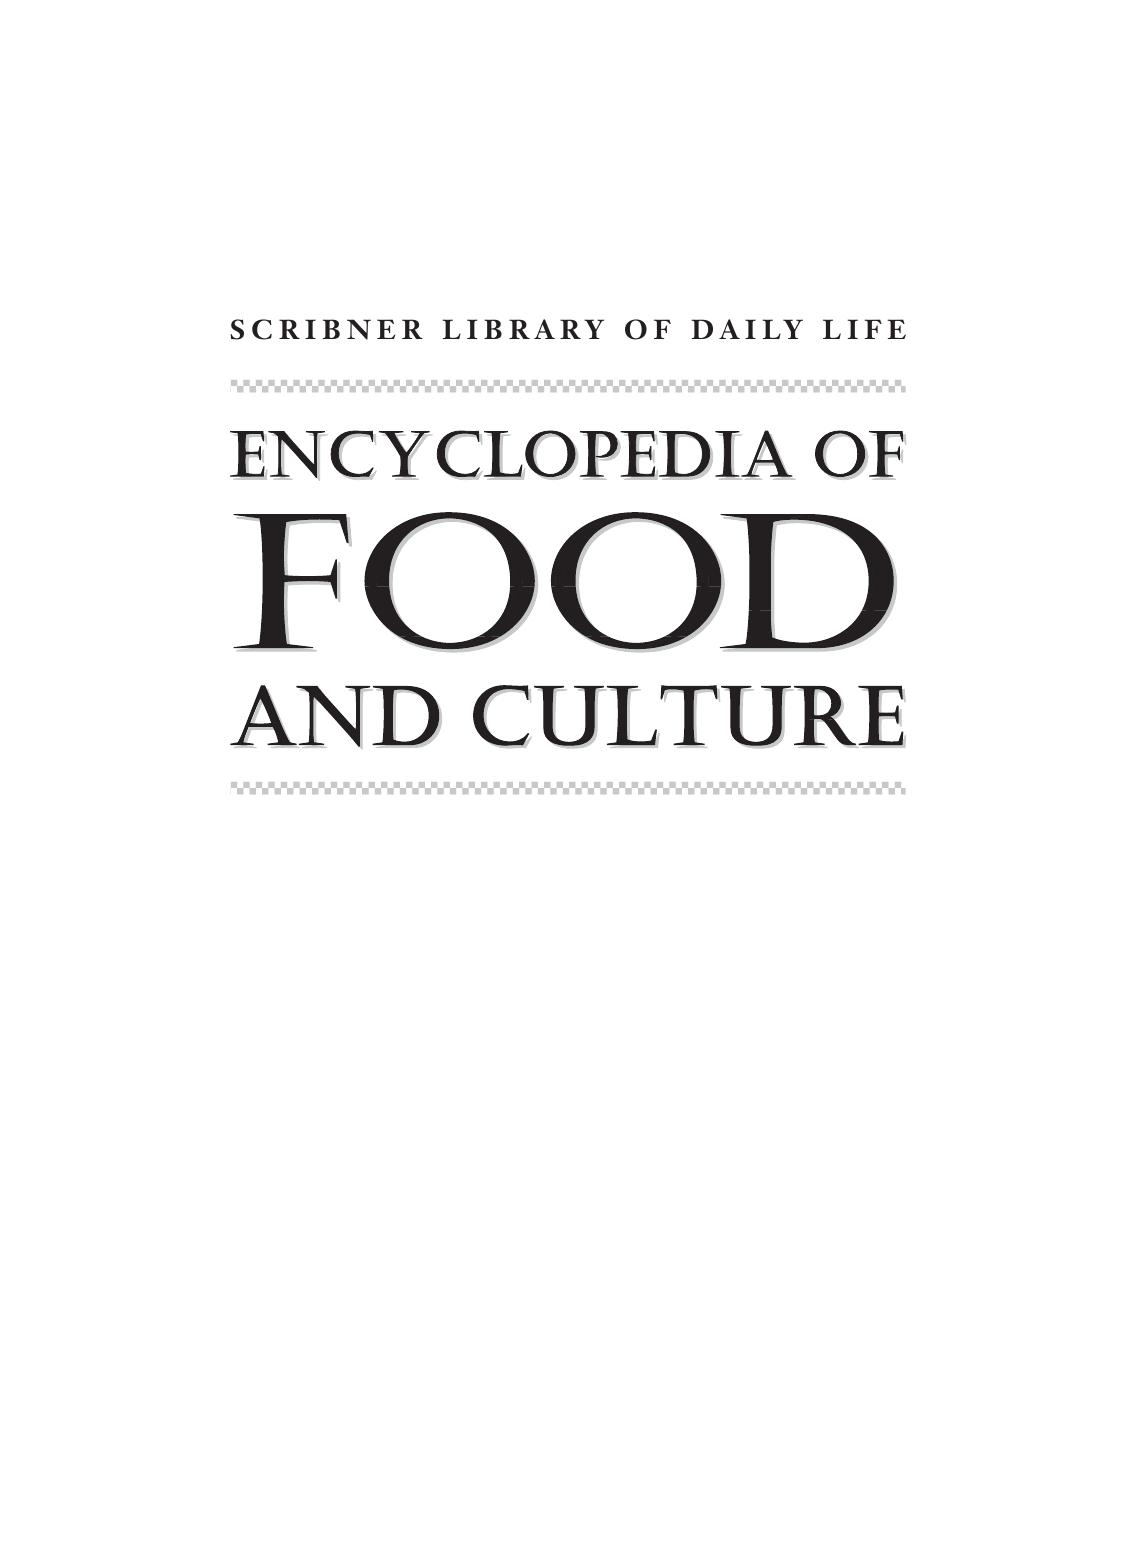 Encyclopedia Of Food And Culture, Volume 2 by Unknown